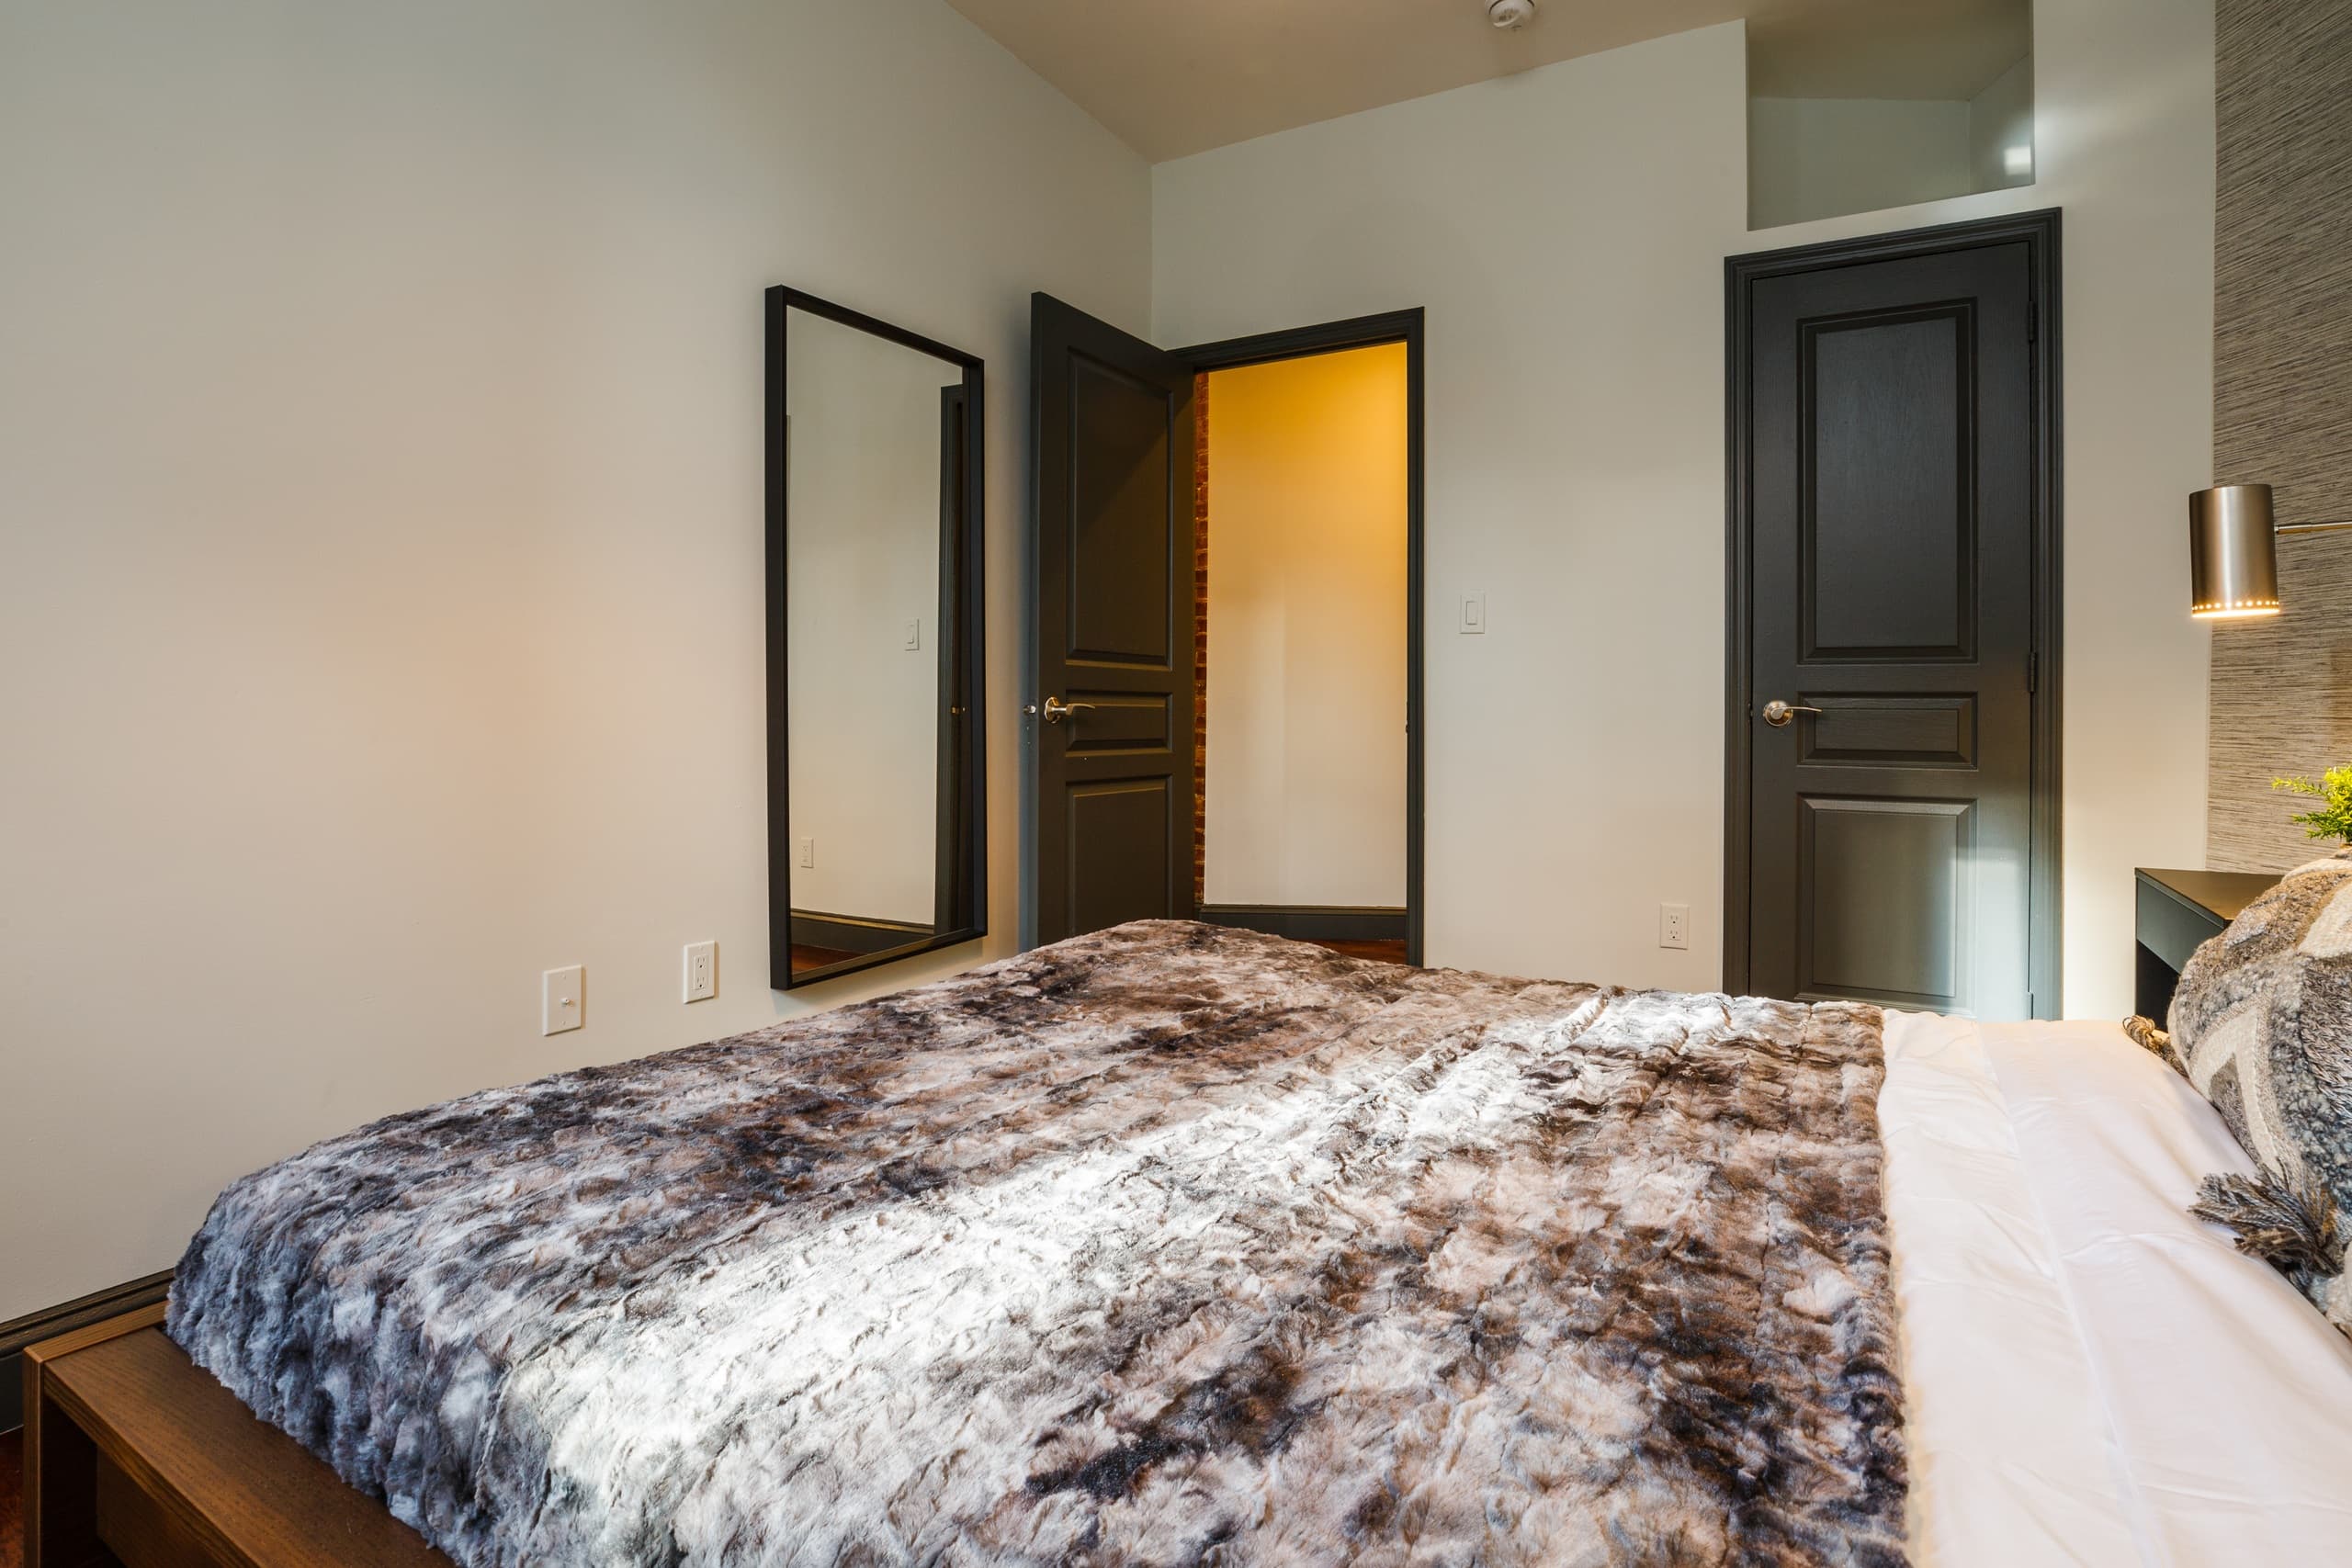 Photo 2 of #519: Queen Bedroom A at June Homes